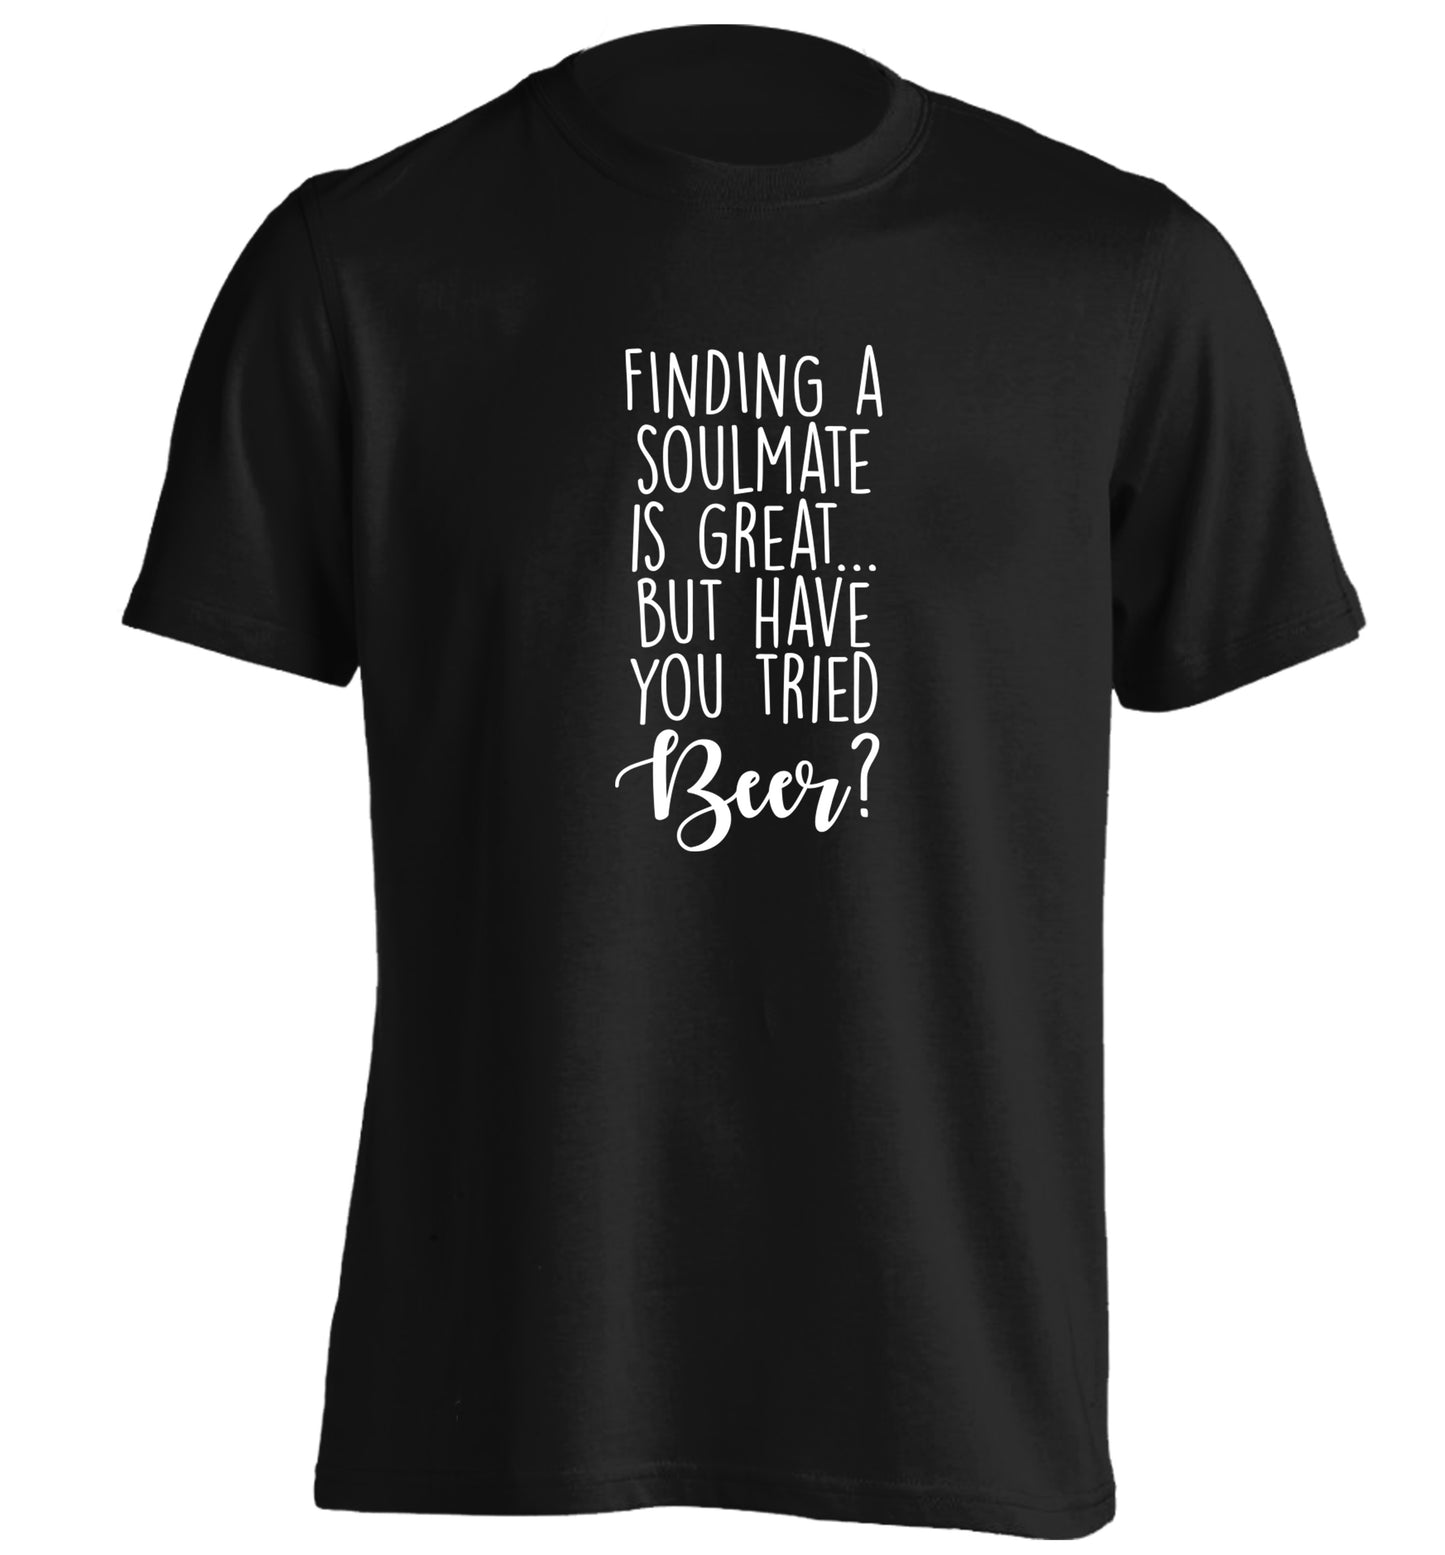 Finding a soulmate is great but have you tried beer? adults unisex black Tshirt 2XL